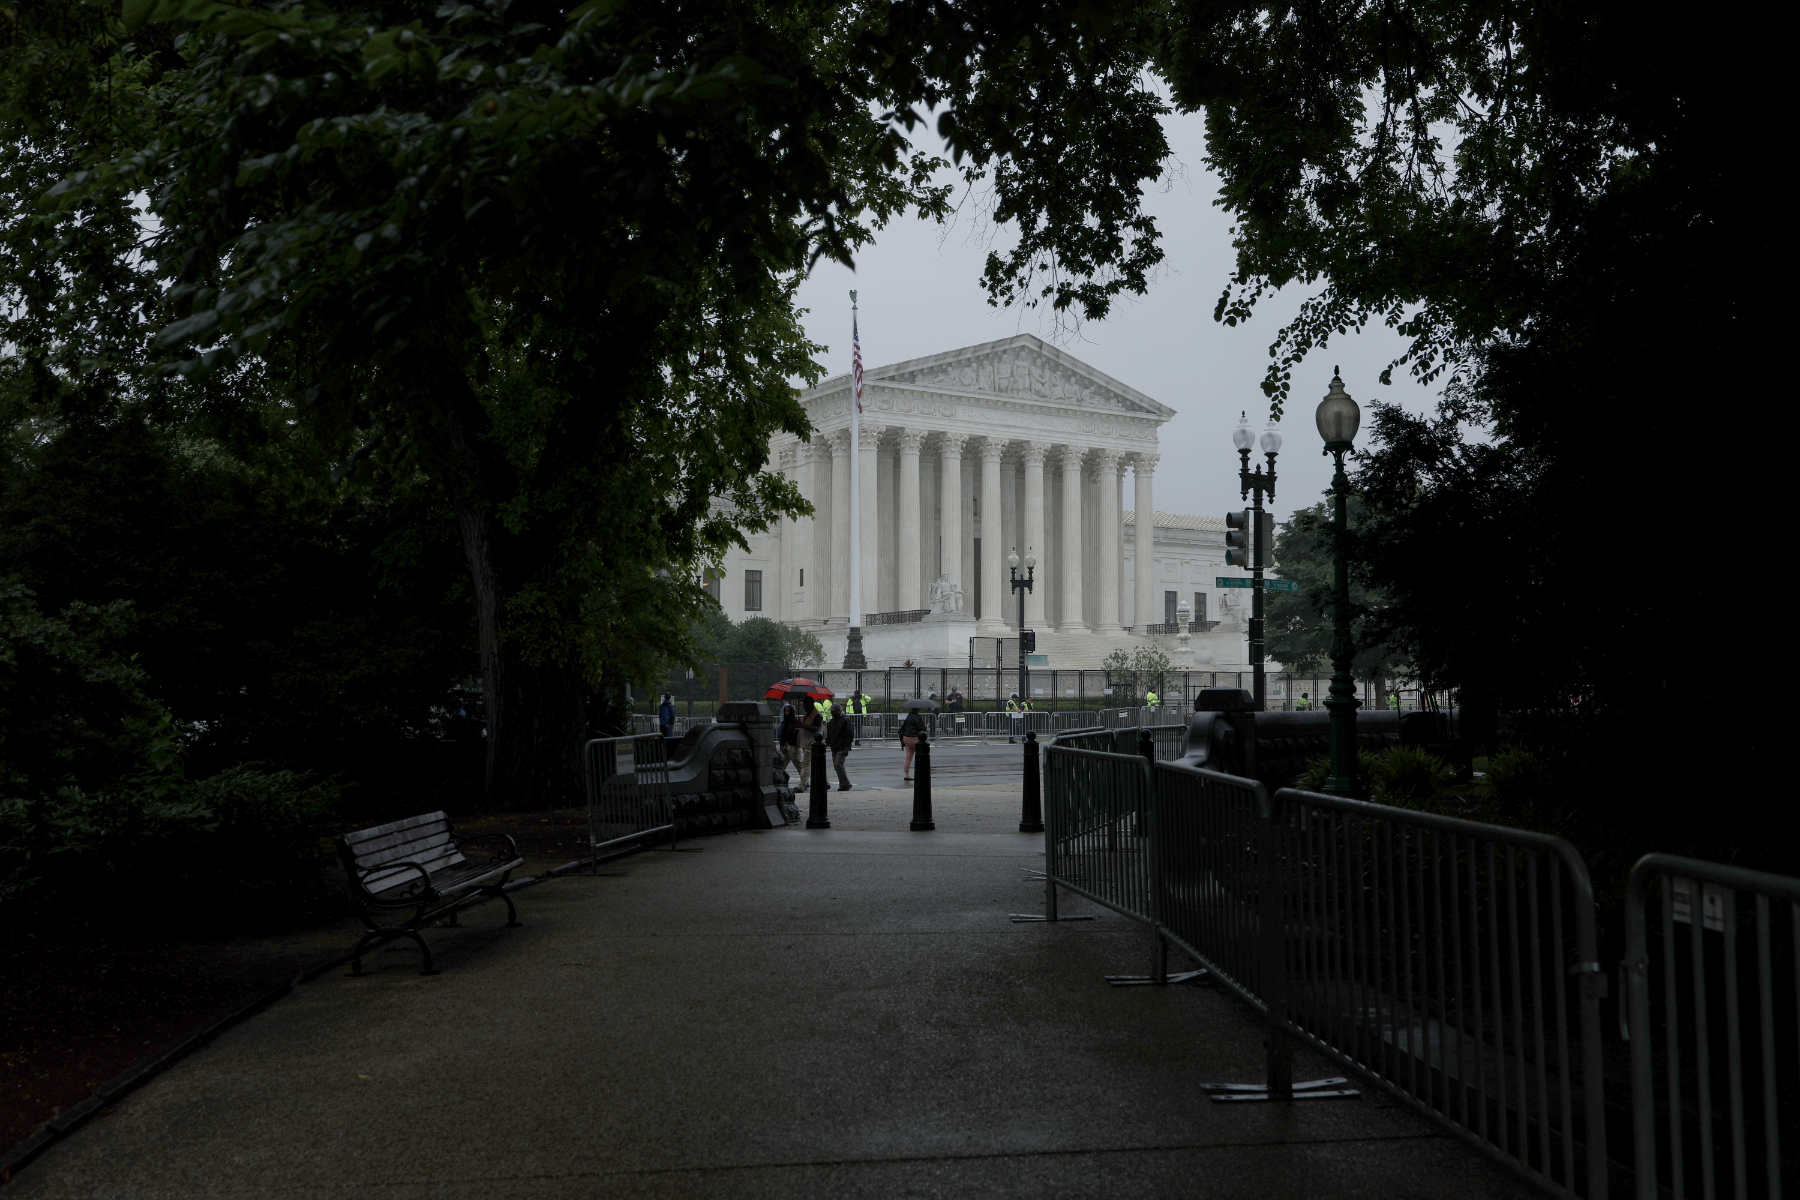 A view of the United States Supreme Court from a tree-lined walkway